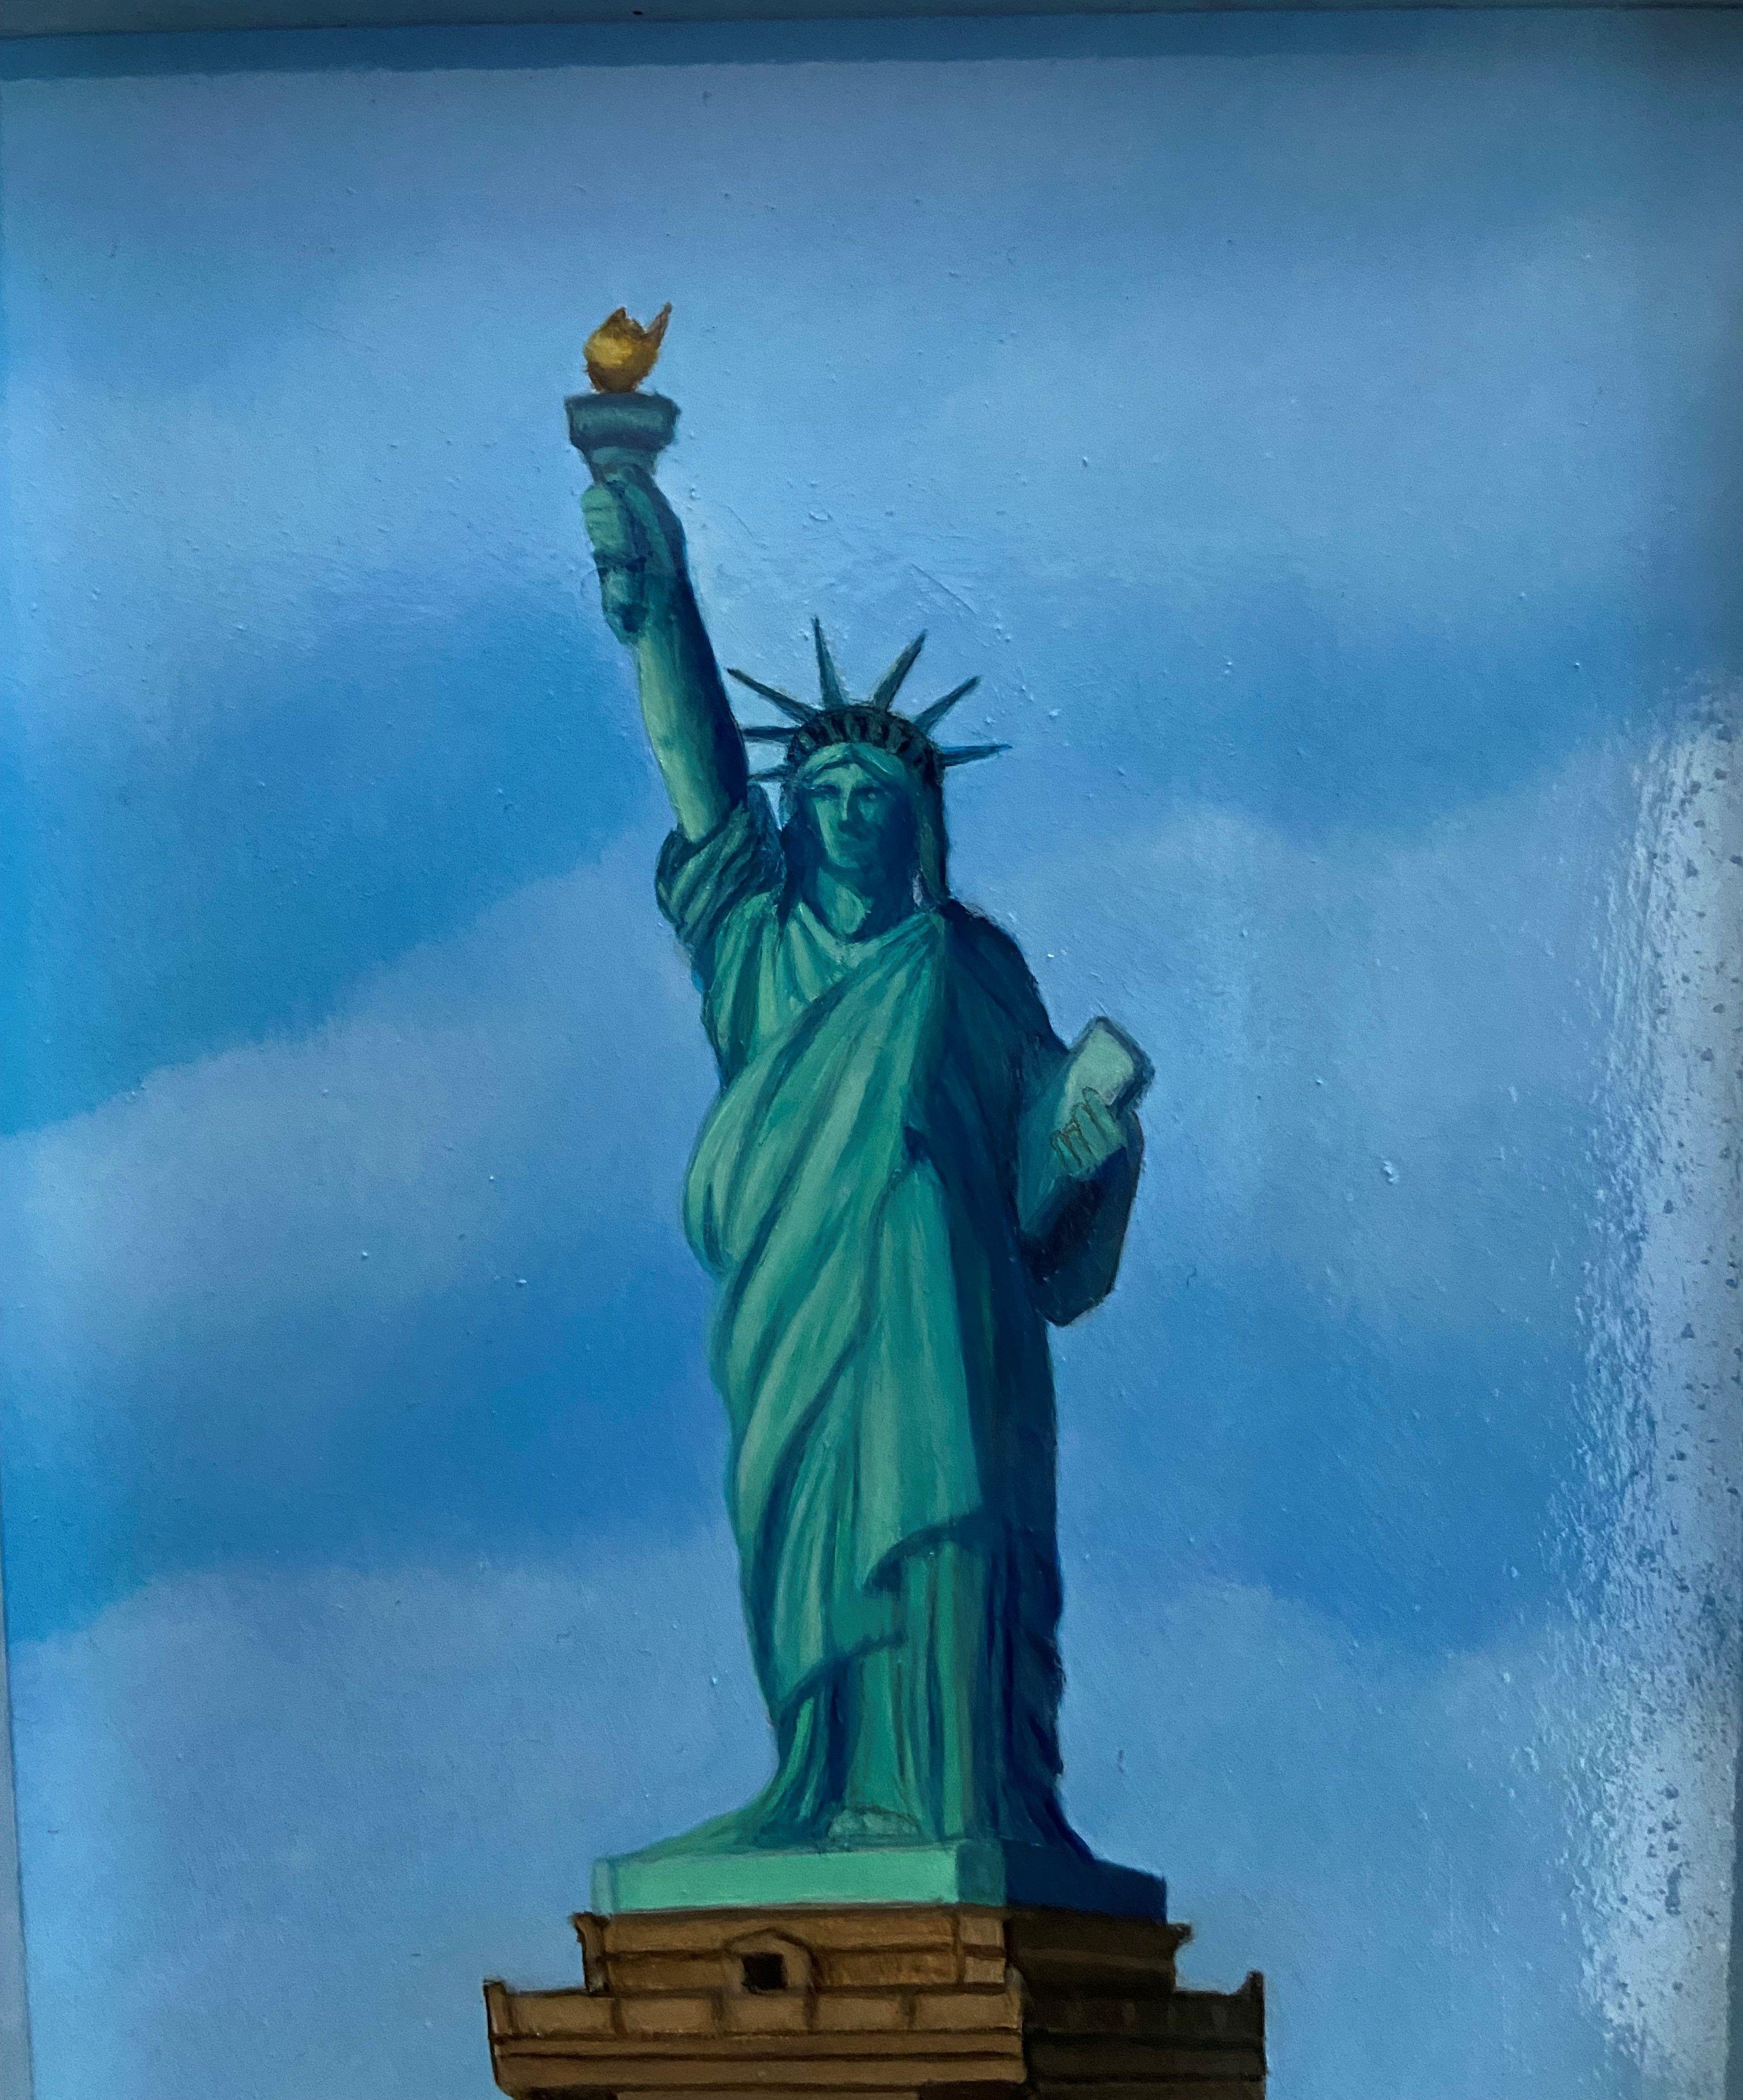 No matter how difficult and challenging our circumstances may become, Lady Liberty has been a beacon of hope around the globe for all who have come here.  This painting will become your own beacon hanging in your home or place of business.  The